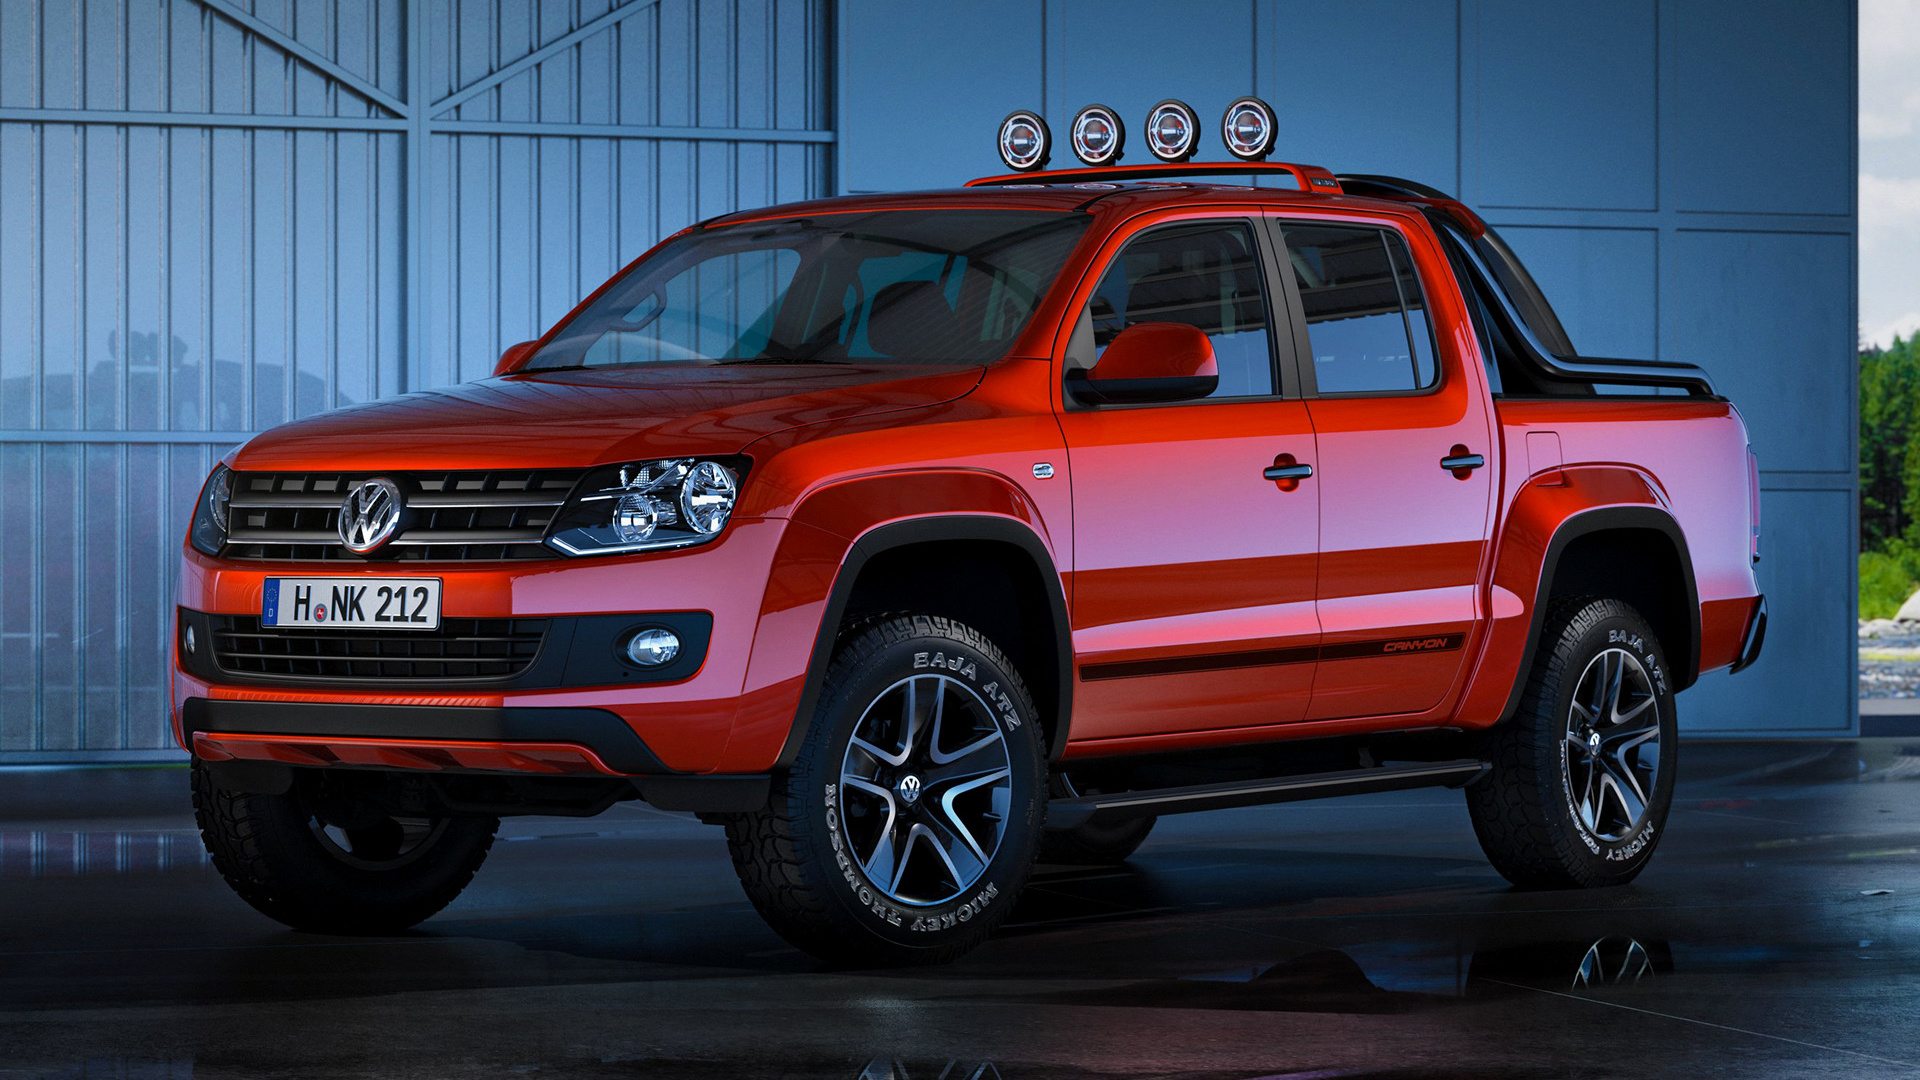 2012 Volkswagen Amarok Canyon Concept Wallpapers and HD 